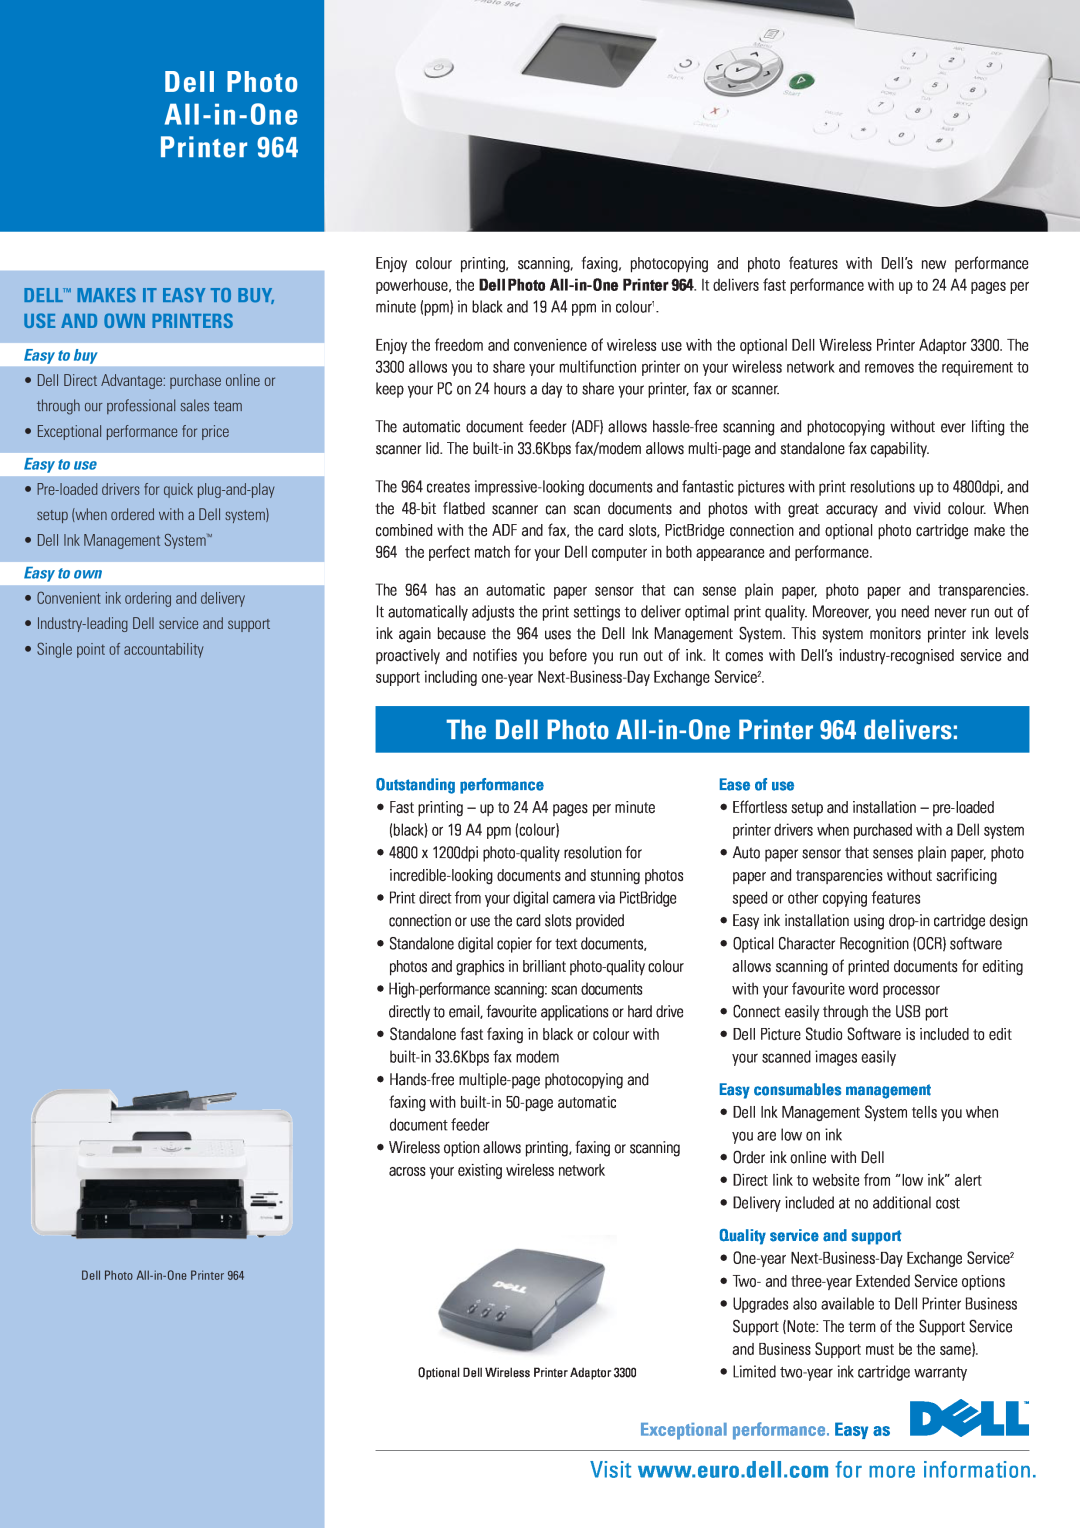 Dell 964 warranty Dell Photo All-in-One Printer, Exceptional performance. Easy as, Easy to buy, Easy to use, Easy to own 